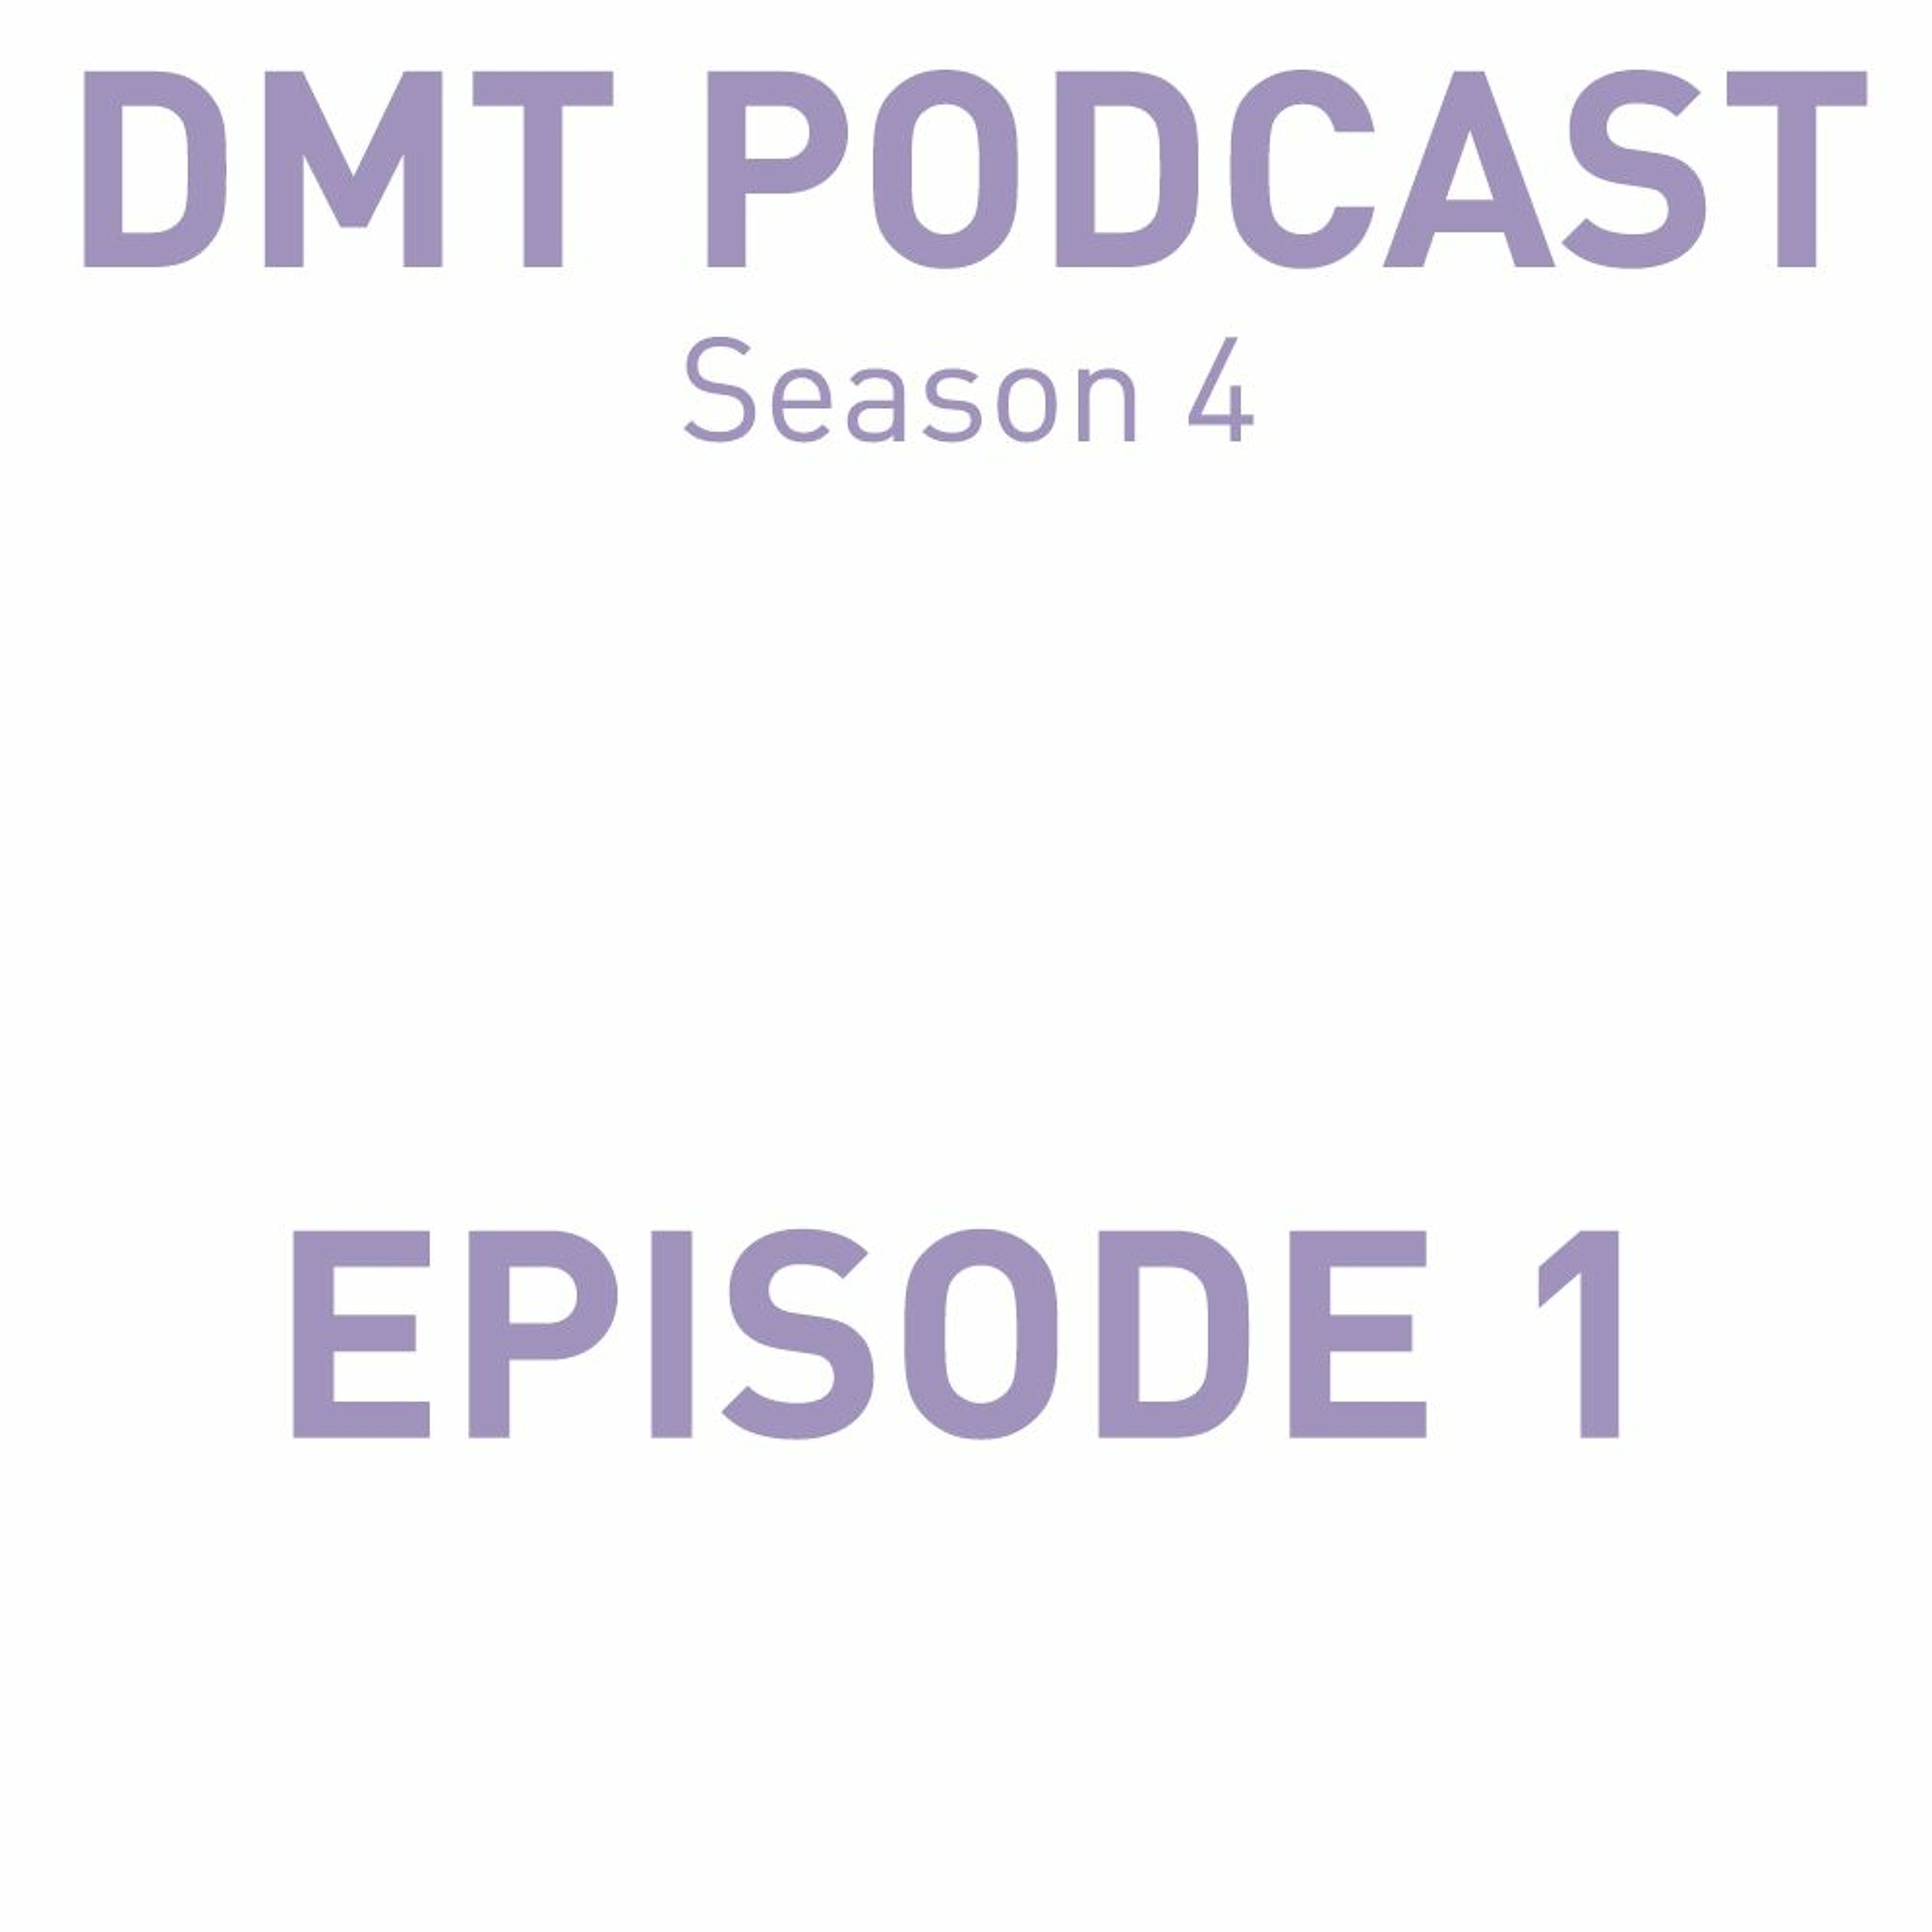 What is this podcast? | DMTPodcast S4 Ep 1